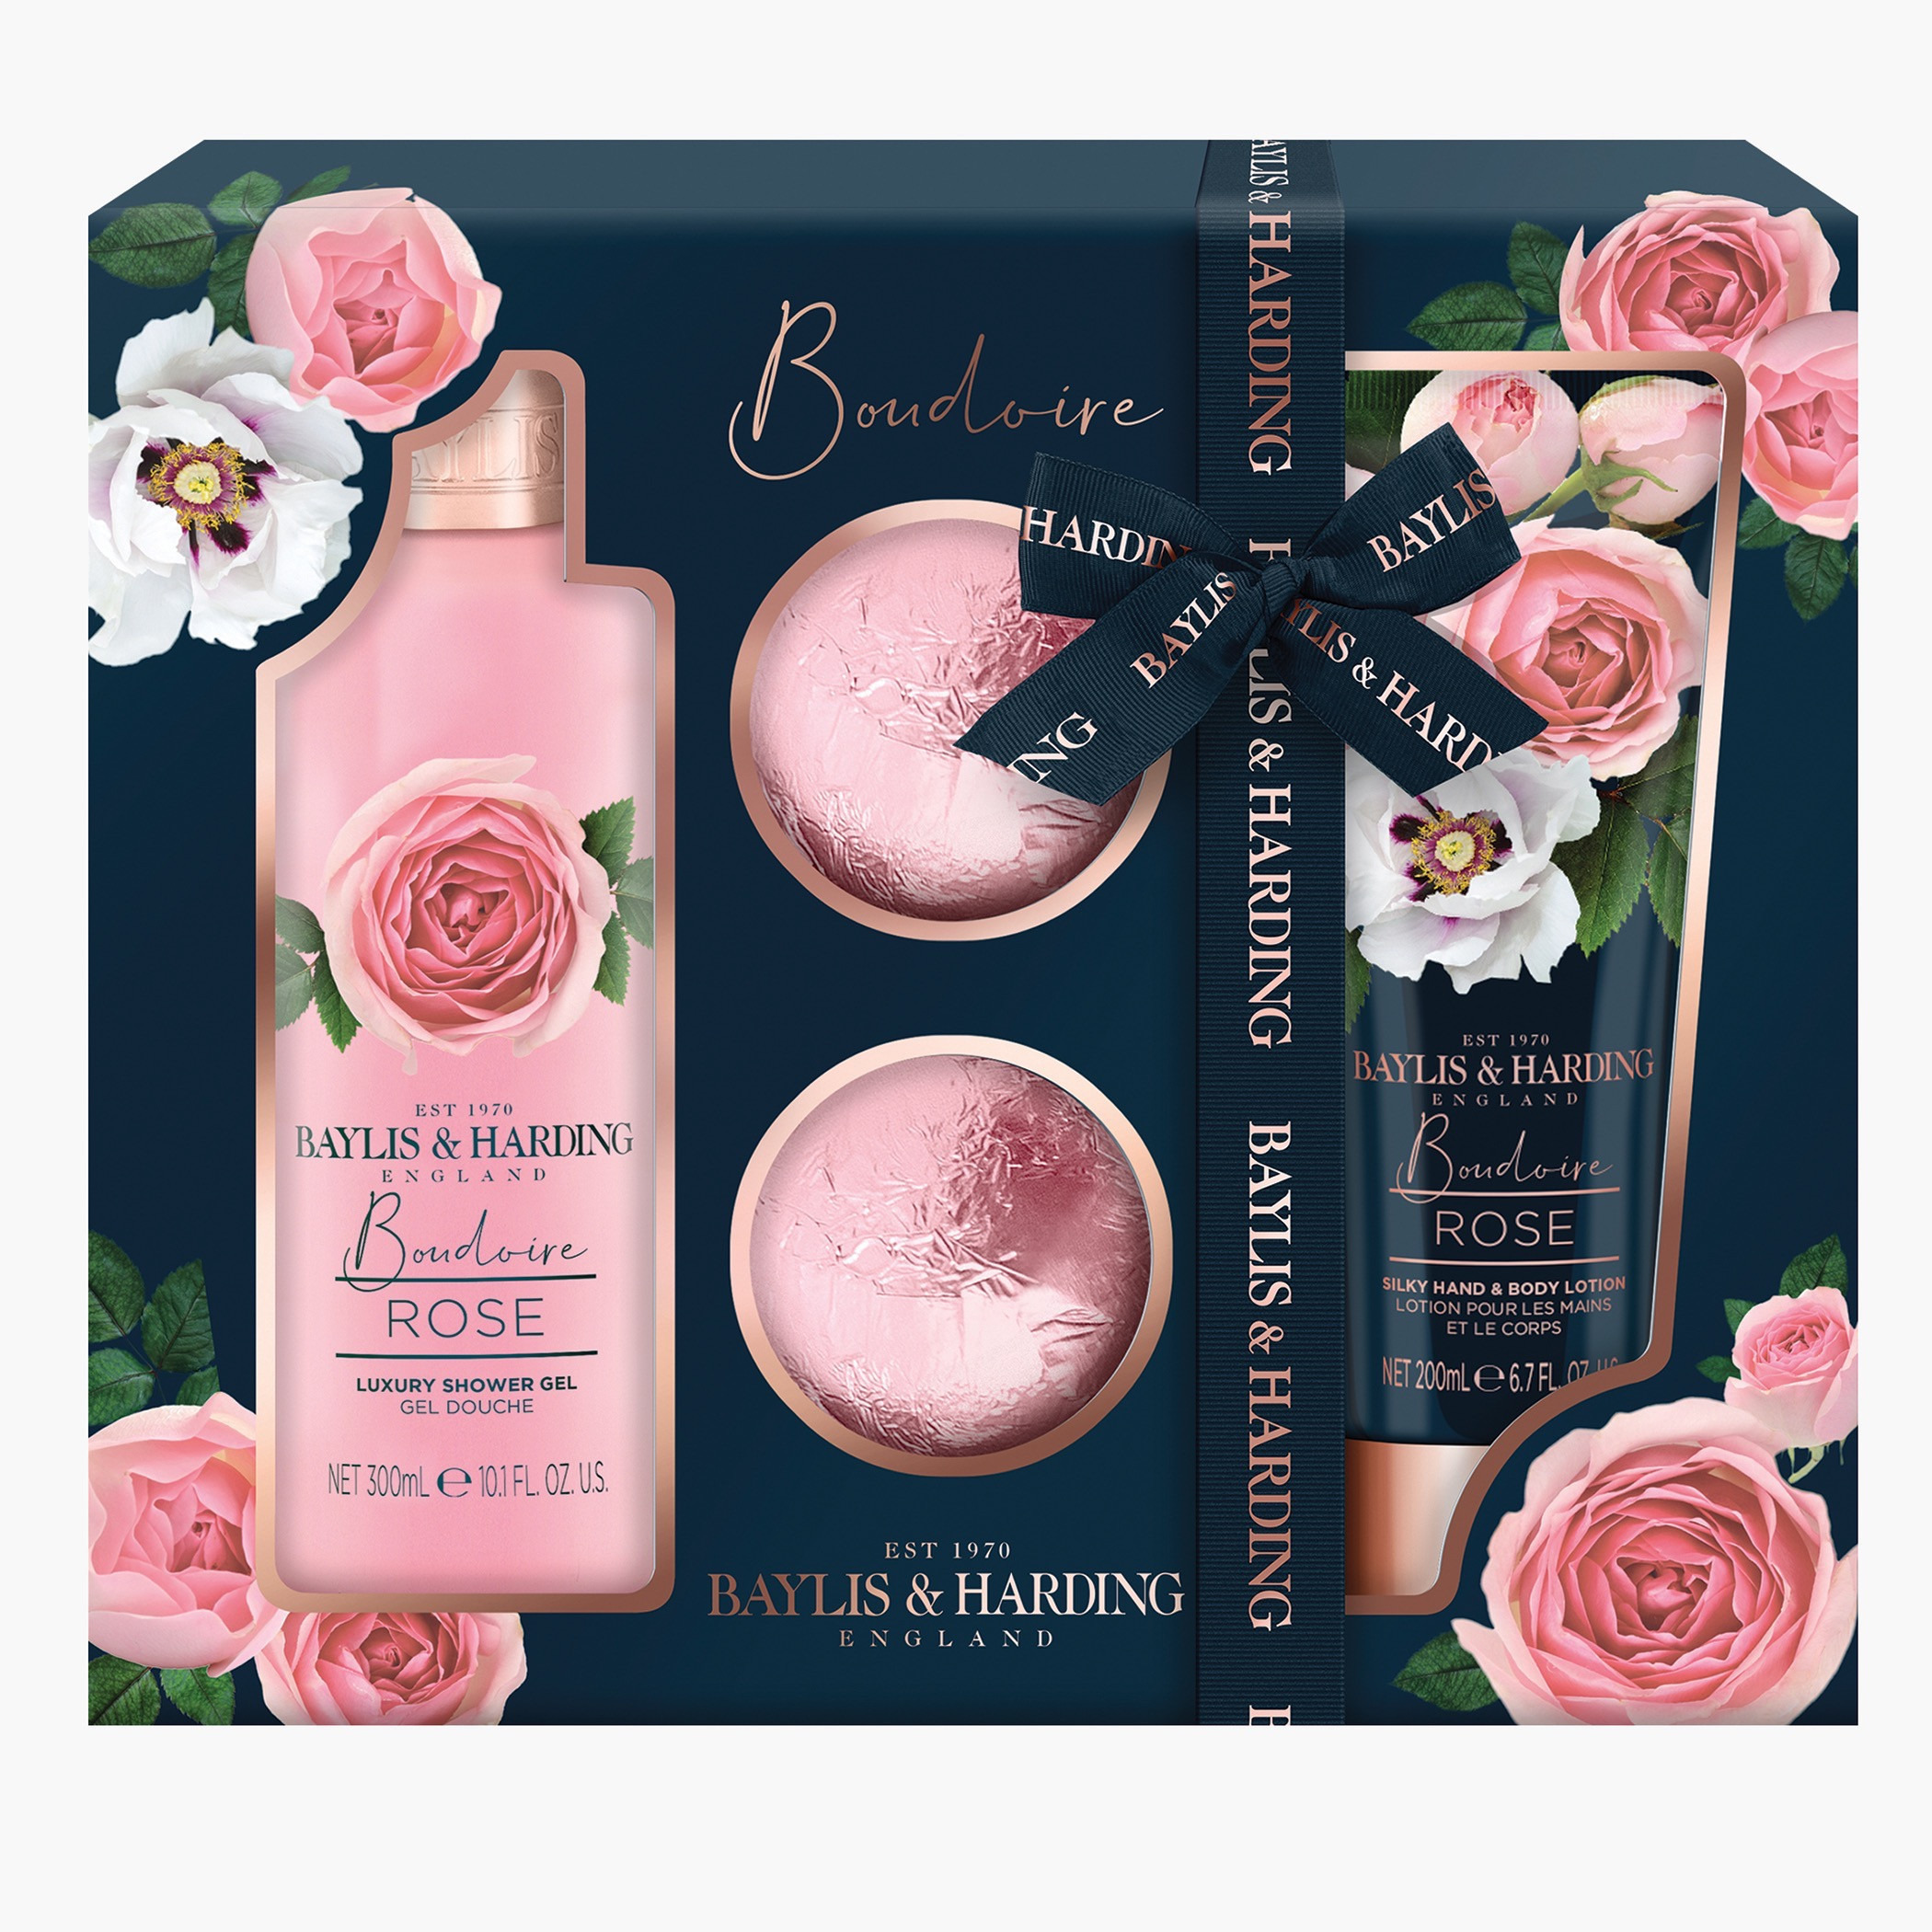 Baylis and Harding Valentines Gift Ideas Archives - Let's talk beauty